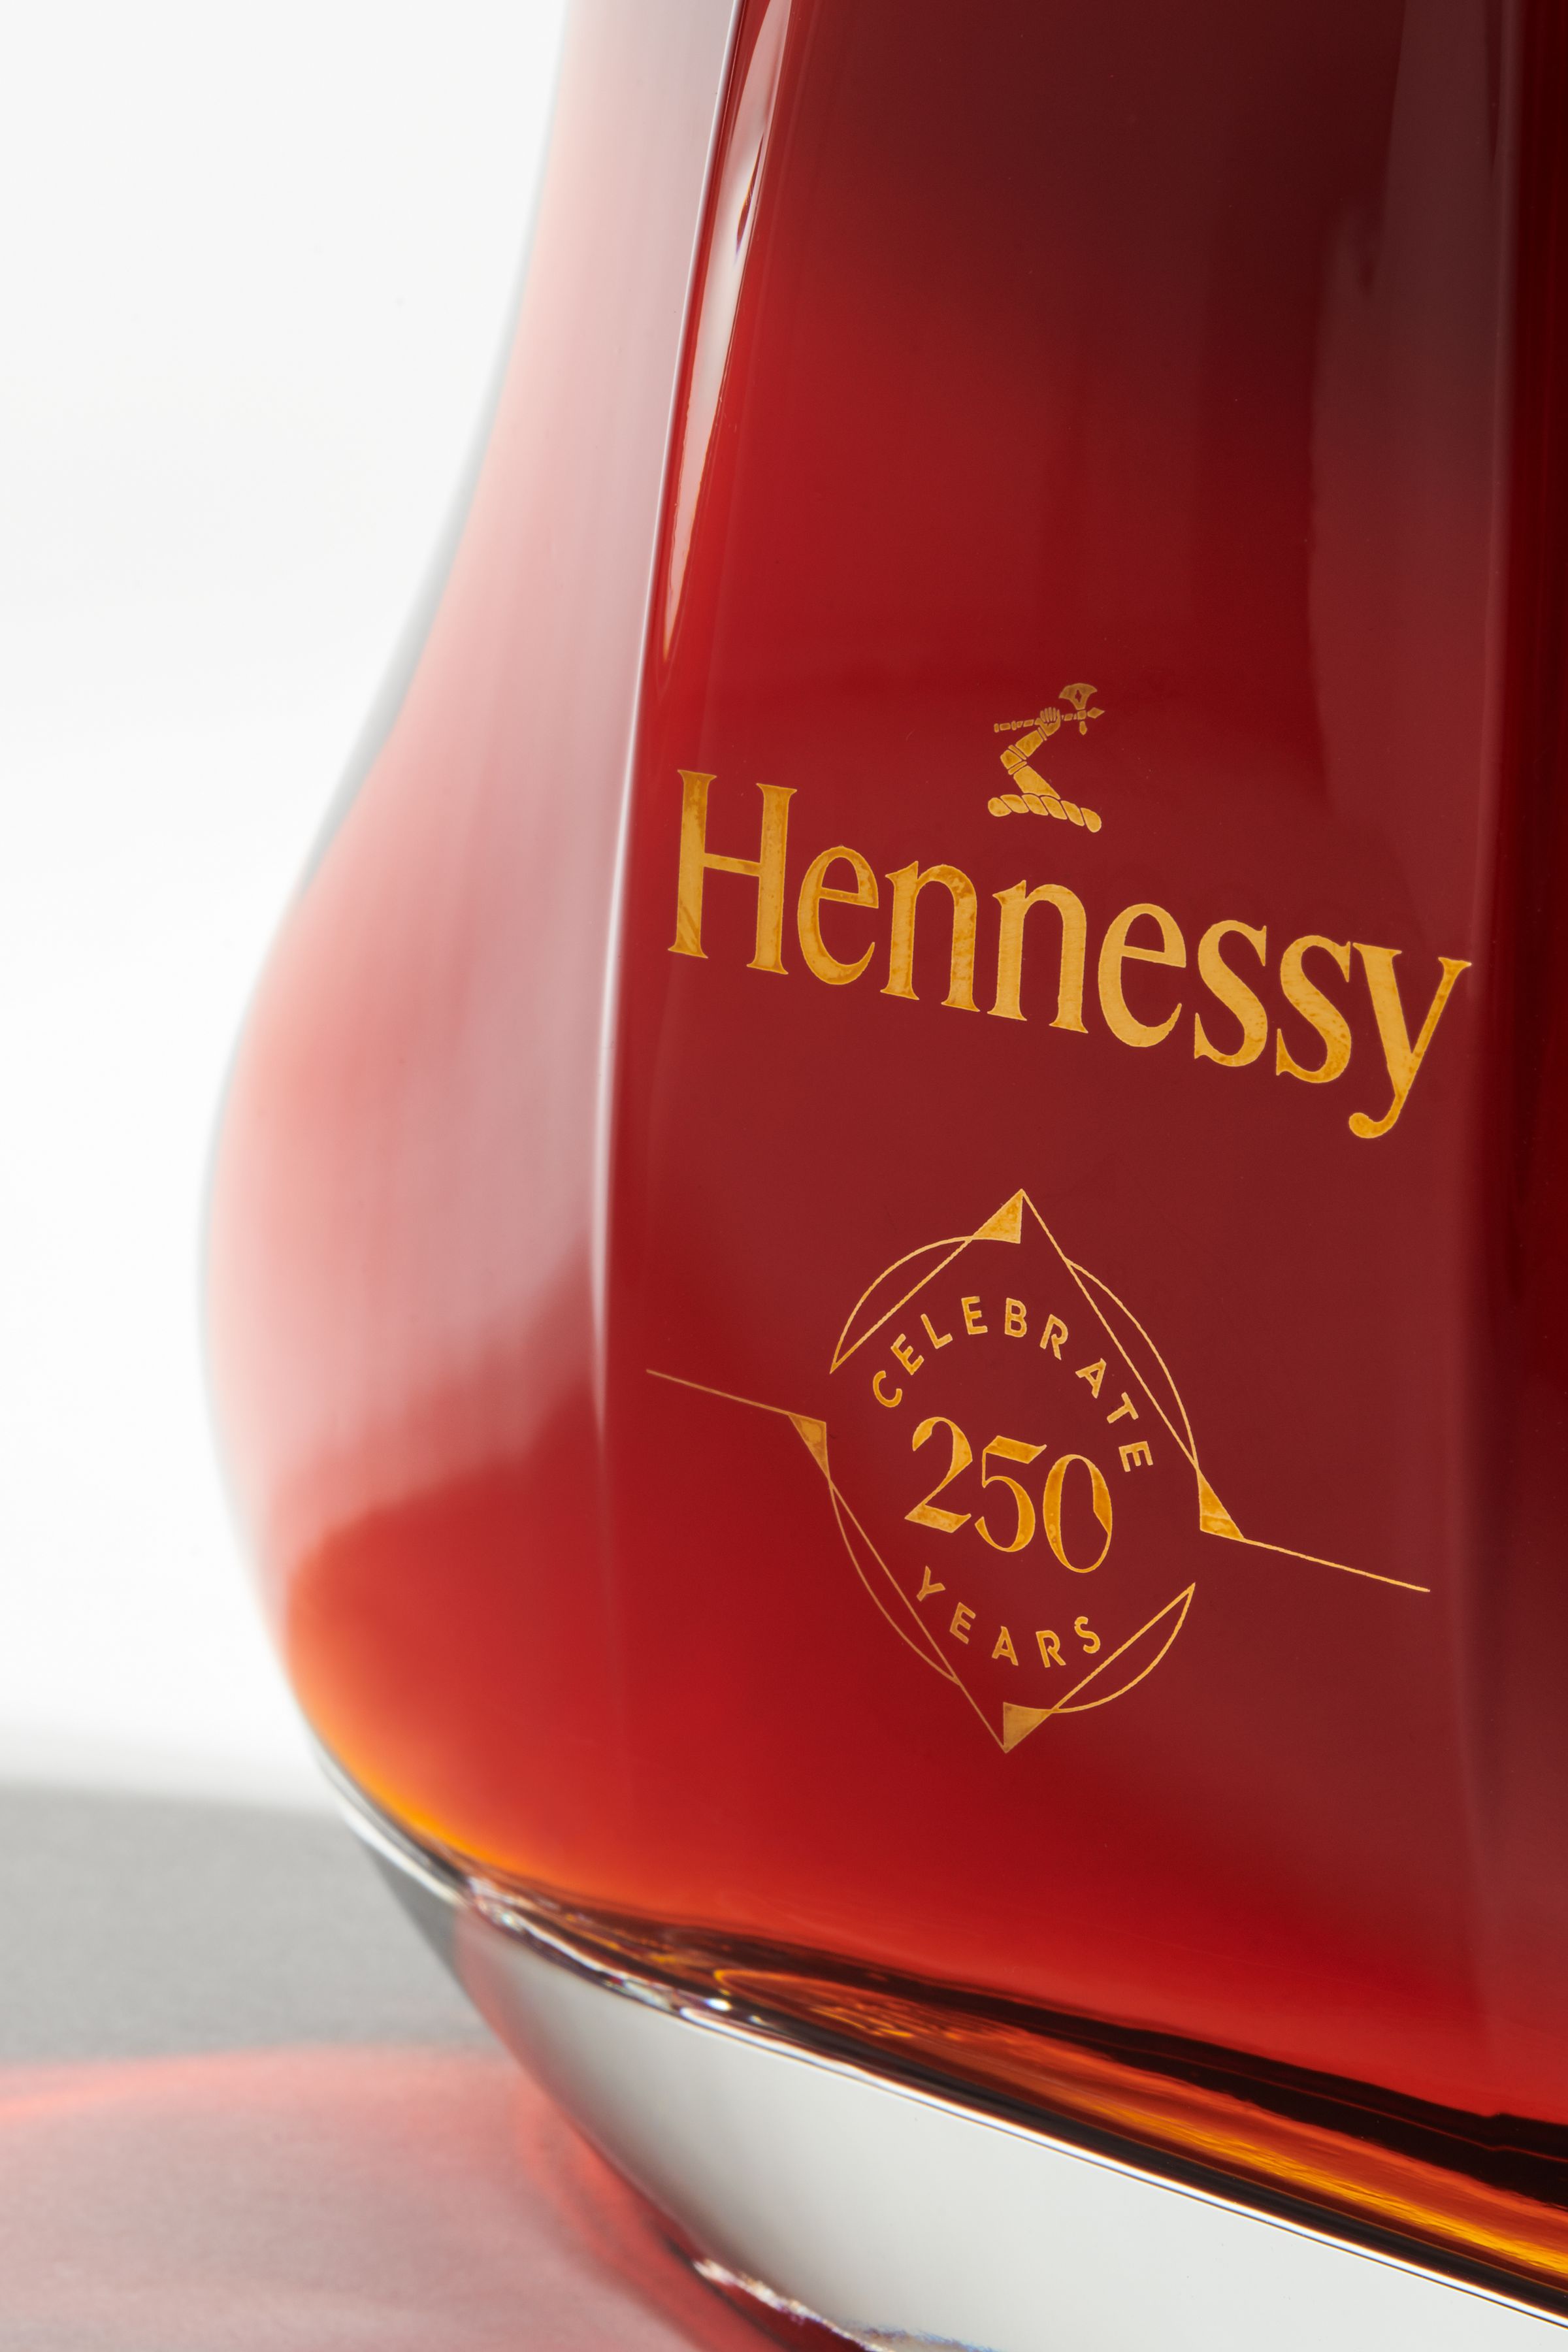 Hennessy 250th anniversary logo applied to bottle